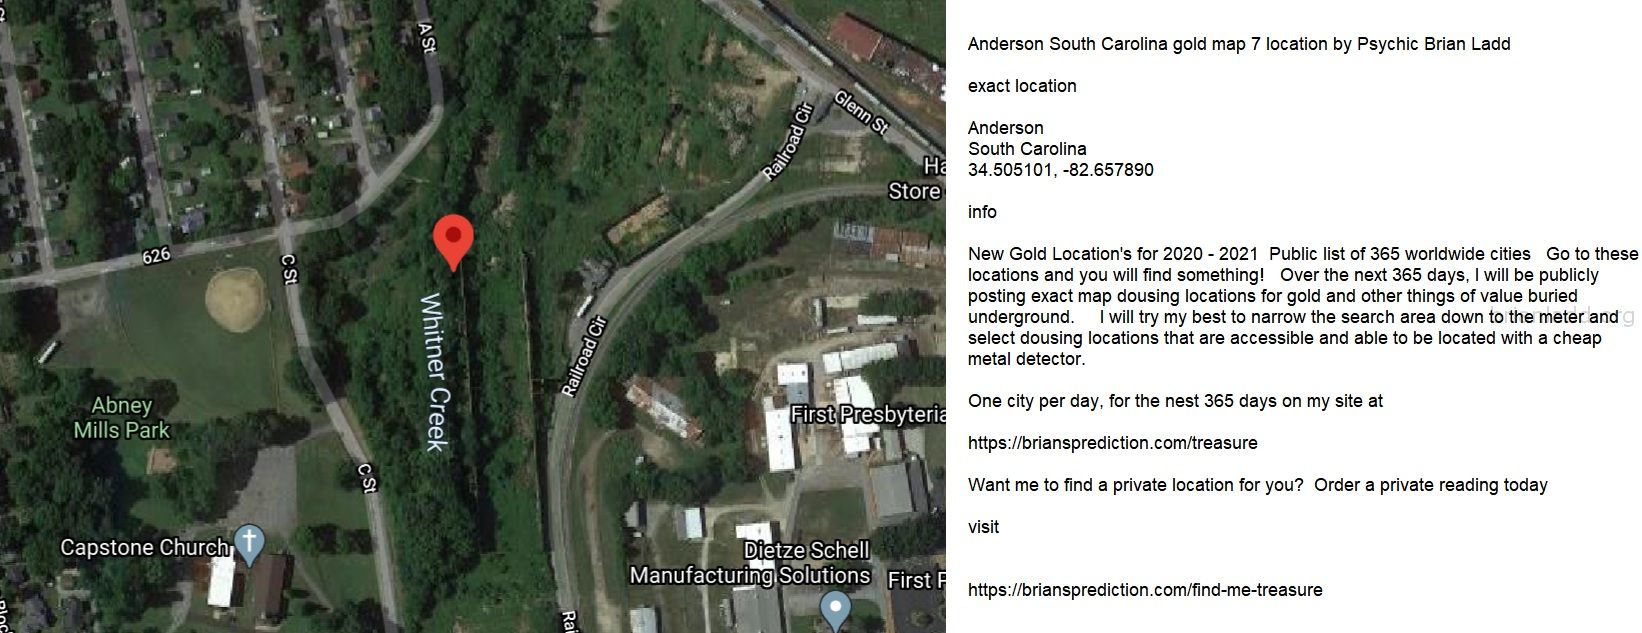 Anderson South Carolina gold map 7 location by Psychic Brian Ladd
New Gold Location's for 2020 - 2021  Public list of 365 worldwide cities   Go to these locations and you will find something!   Over the next 365 days, I will be publicly posting exact map dousing locations for gold and other things of value buried underground.     I will try my best to narrow the search area down to the meter and select dousing locations that are accessible and able to be located with a cheap metal detector. One city per day, for the nest 365 days on my site at:  https://briansprediction.com/treasure  Want me to find a private location for you for anything?  Order a private reading today at:  https://briansprediction.com/find-me-treasure
